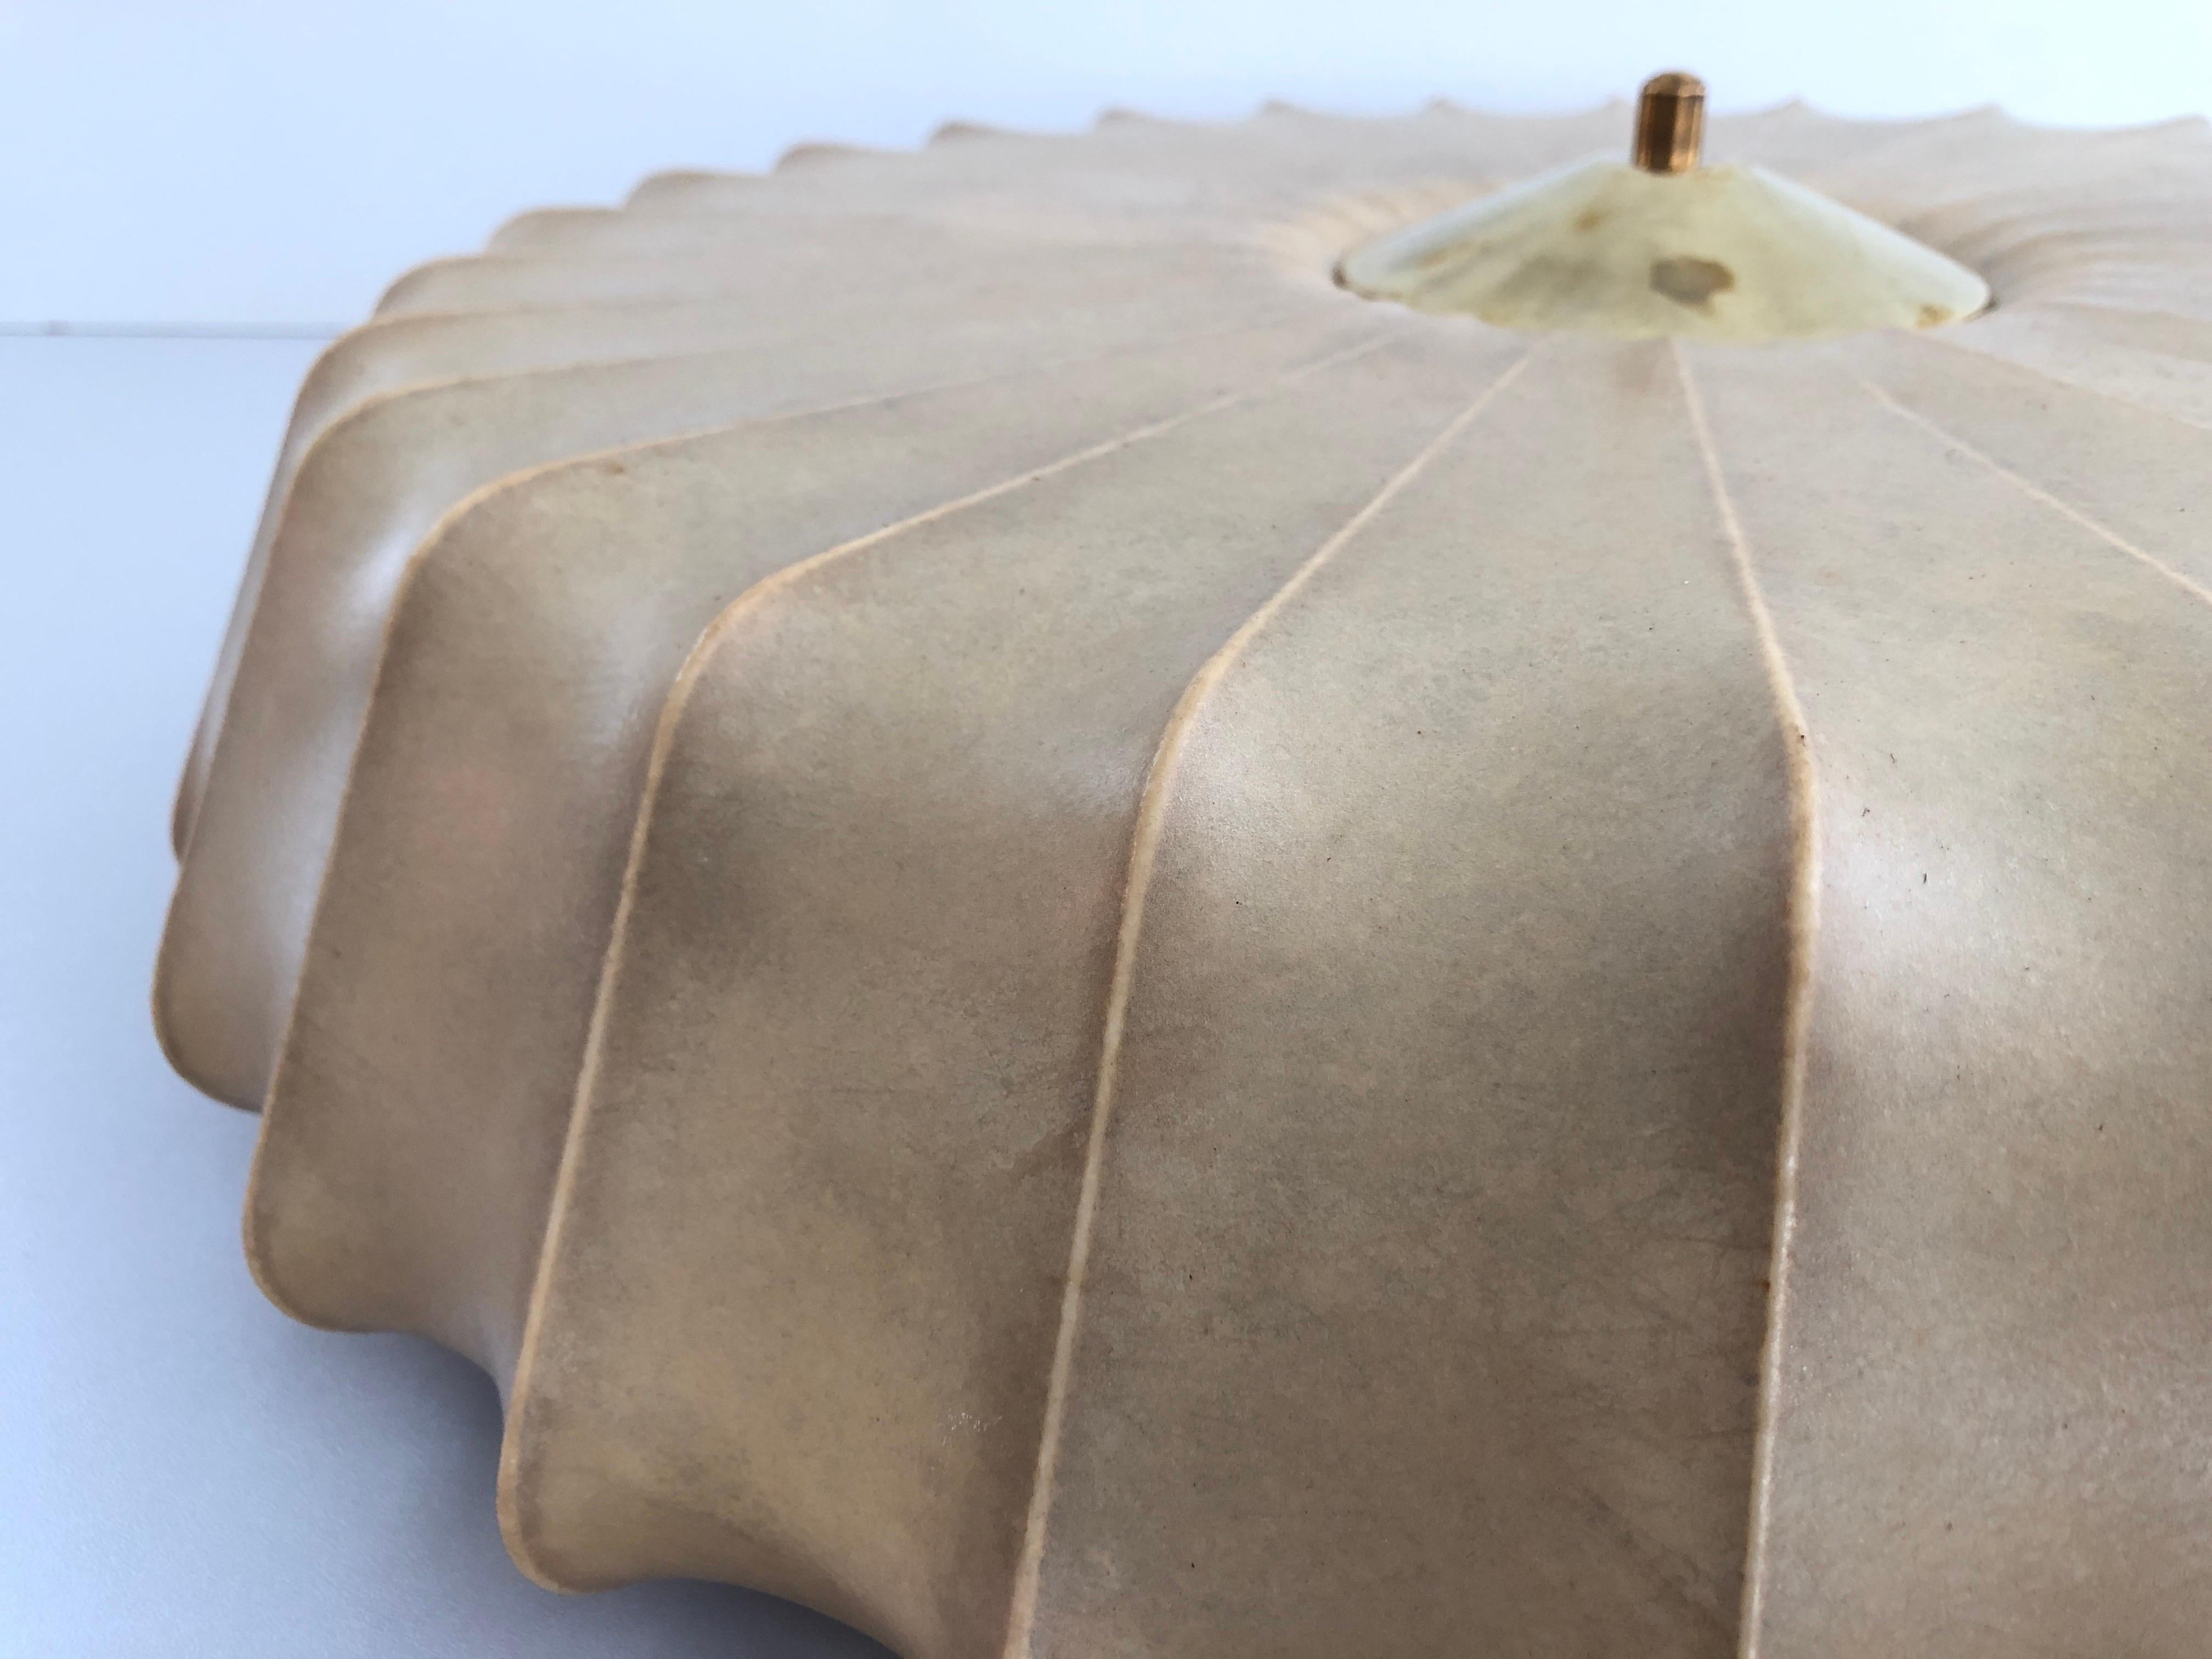 Mid-Century Modern Cocoon Large Flush Mount Ceiling Lamp by Goldkant, 1960s, Germany